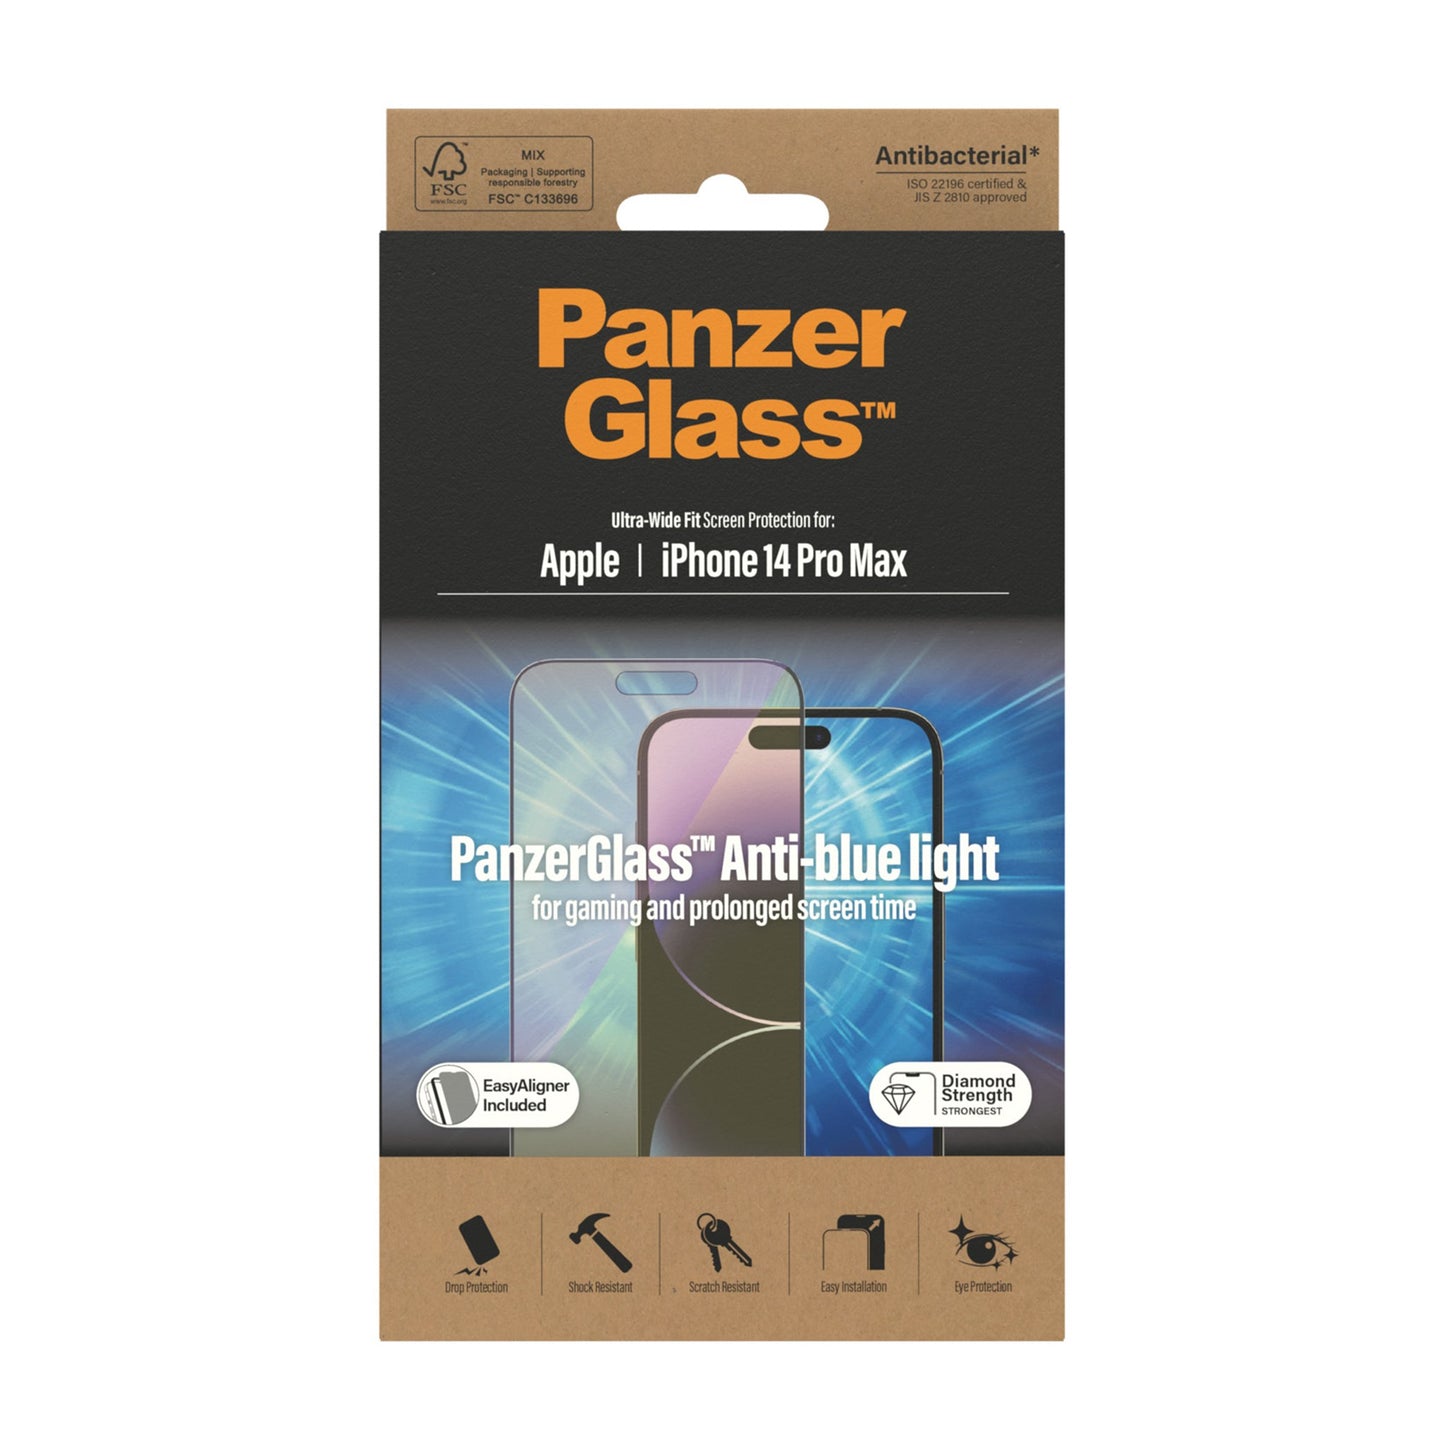 PanzerGlass™ Anti-blue light Screen Protector Apple iPhone 14 Pro Max | Ultra-Wide Fit w. EasyAligner 3